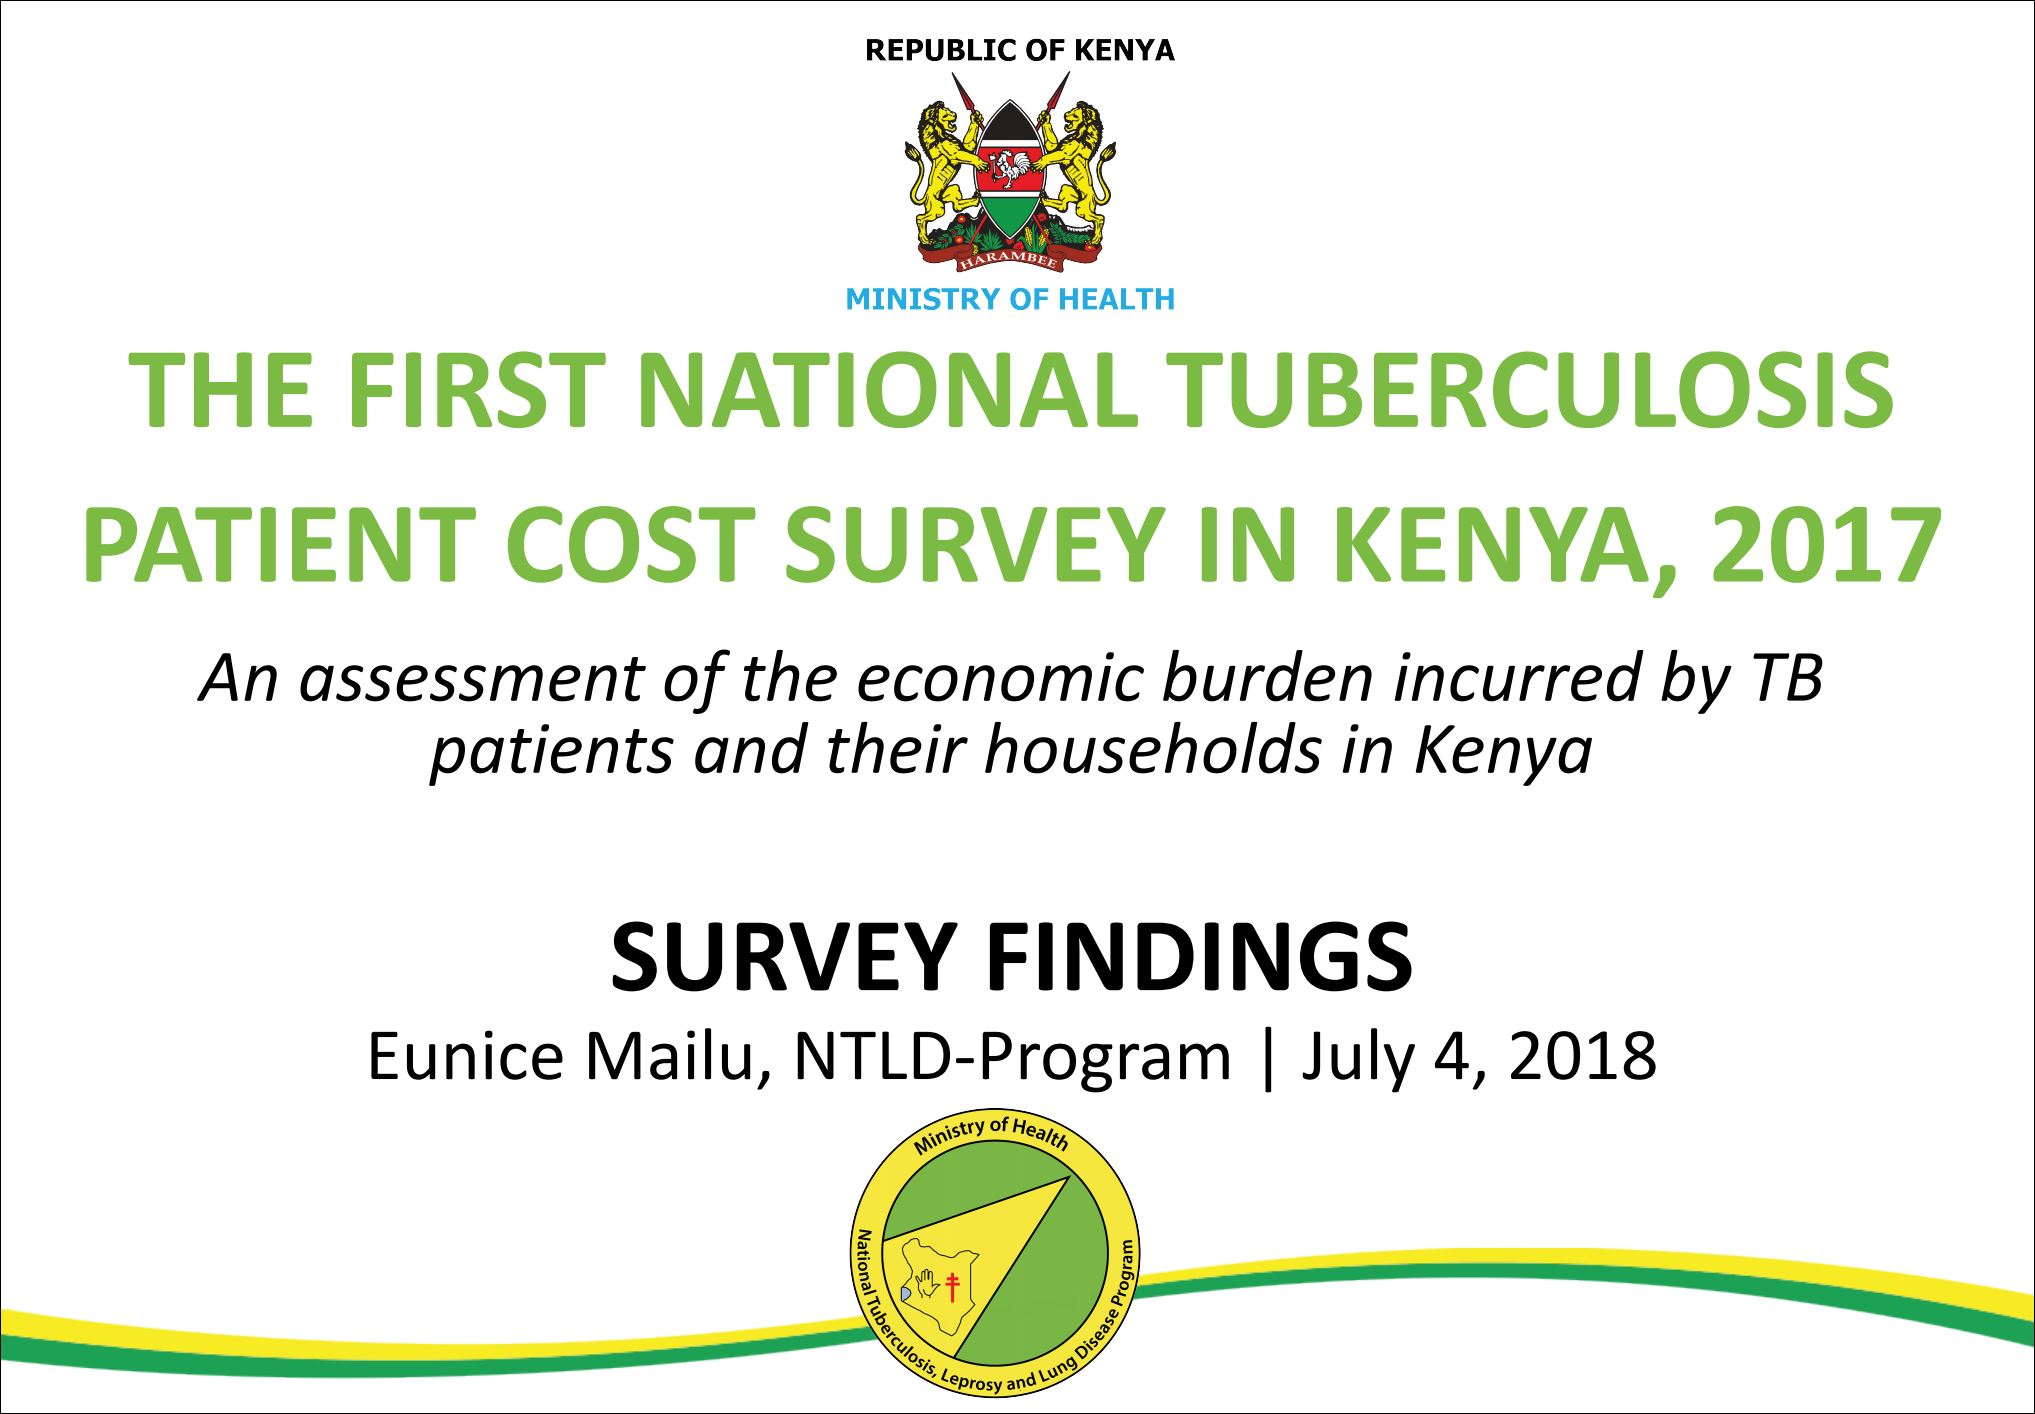 The First National Tuberculosis Patient Cost Survey in Kenya, 2017: An assessment of the economic burden incurred by TB patients and their households in Kenya